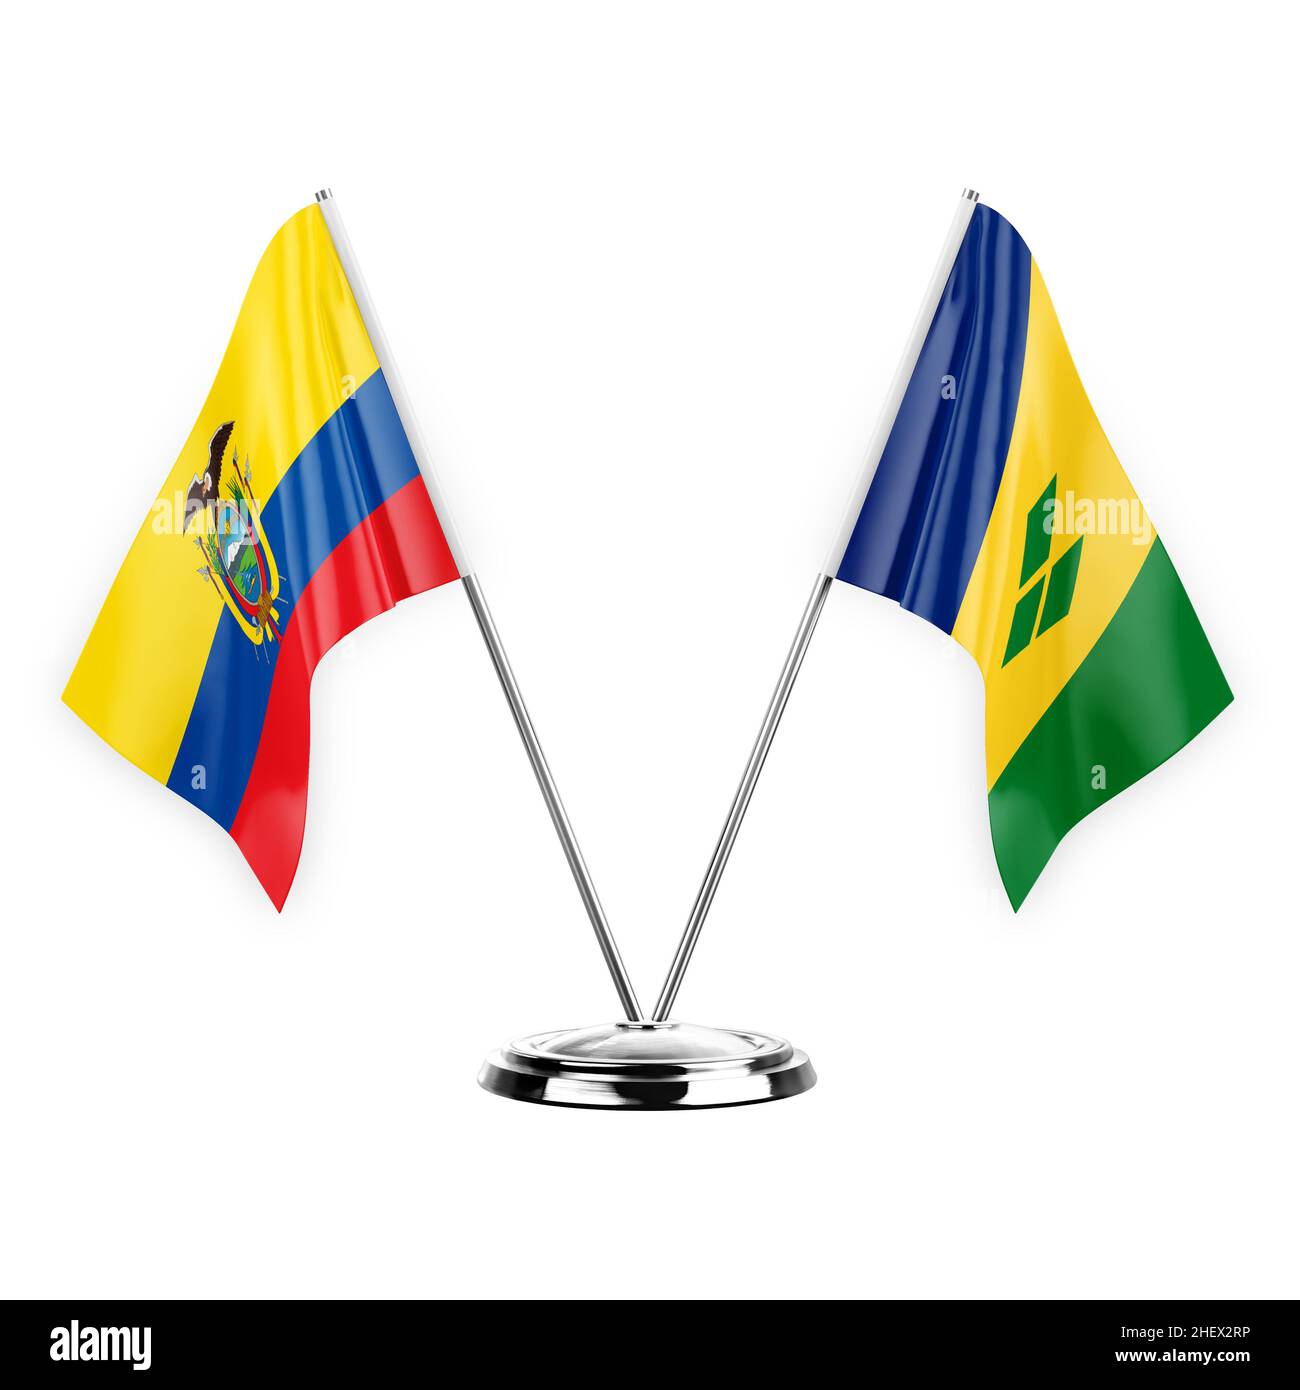 Ecuador saint vincent and the grenadines Cut Out Stock Images ...